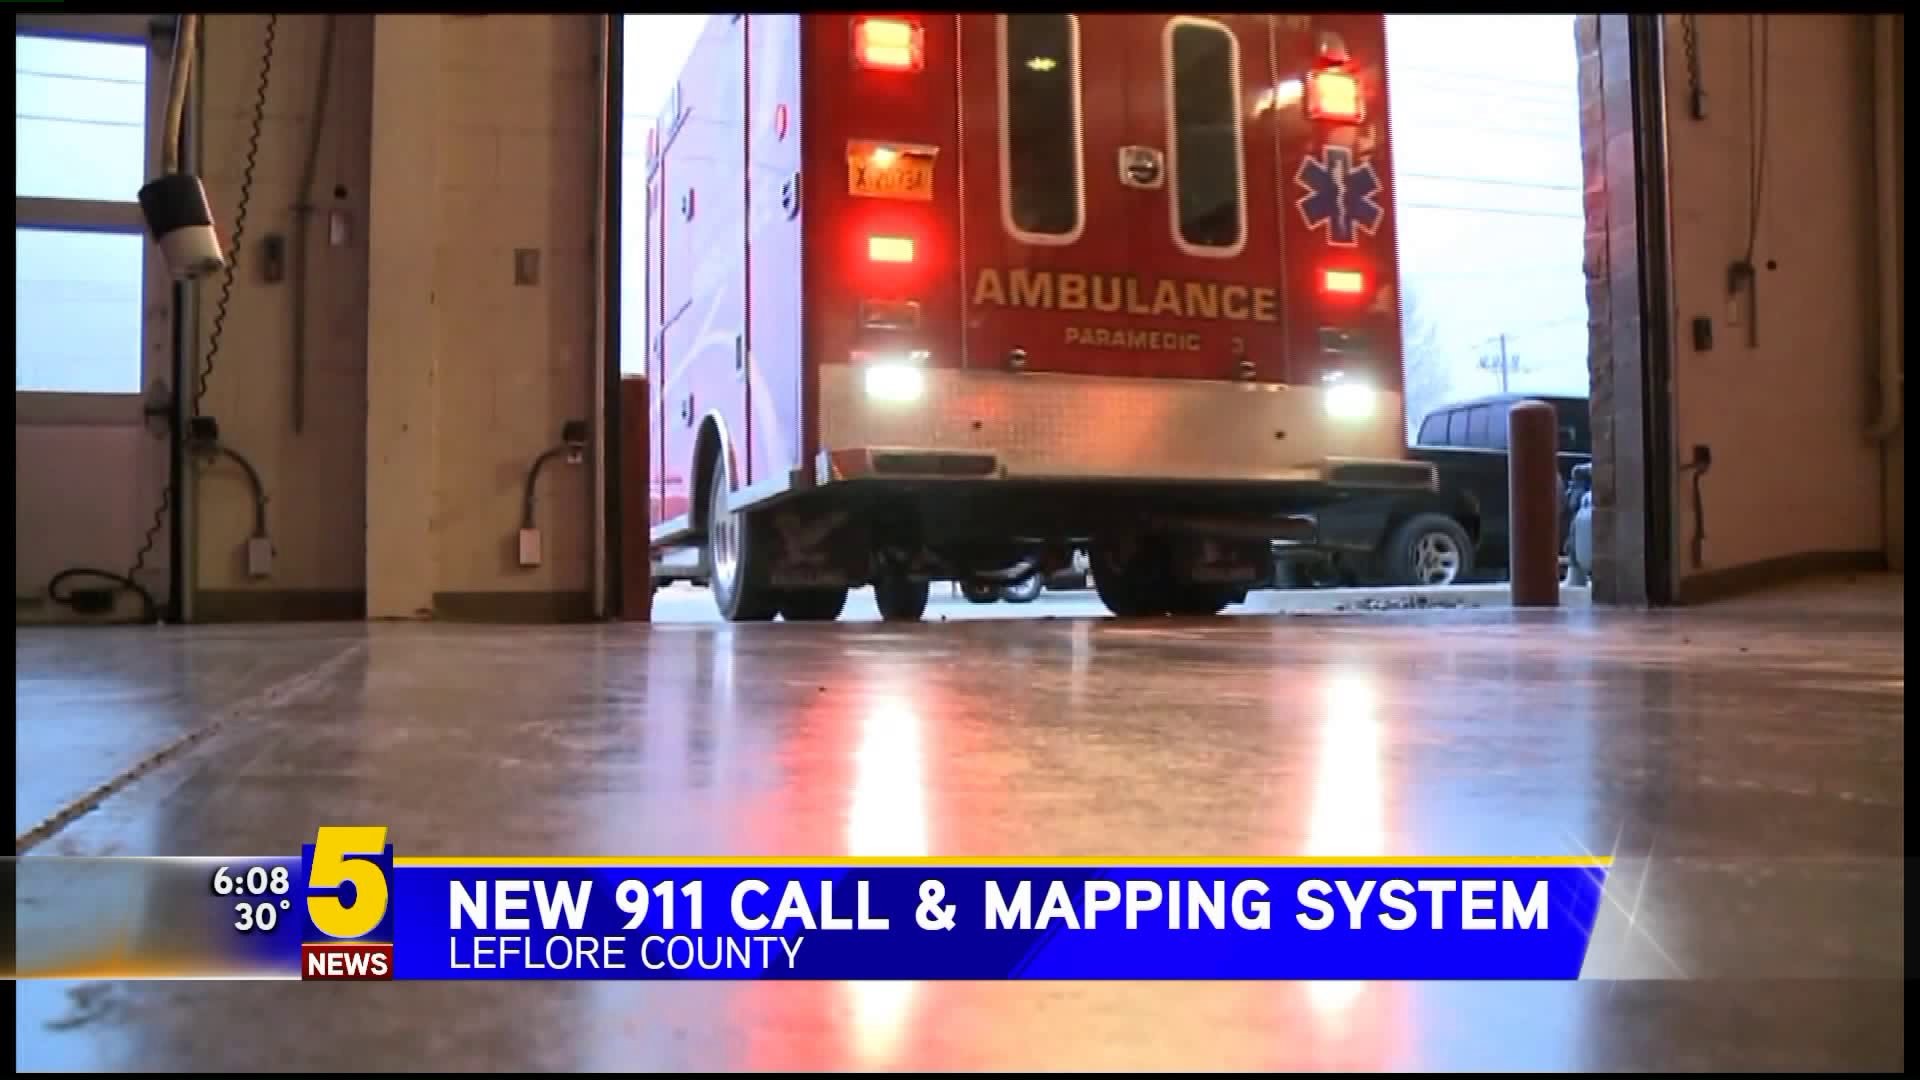 New 911 Call & Mapping System In LeFlore County